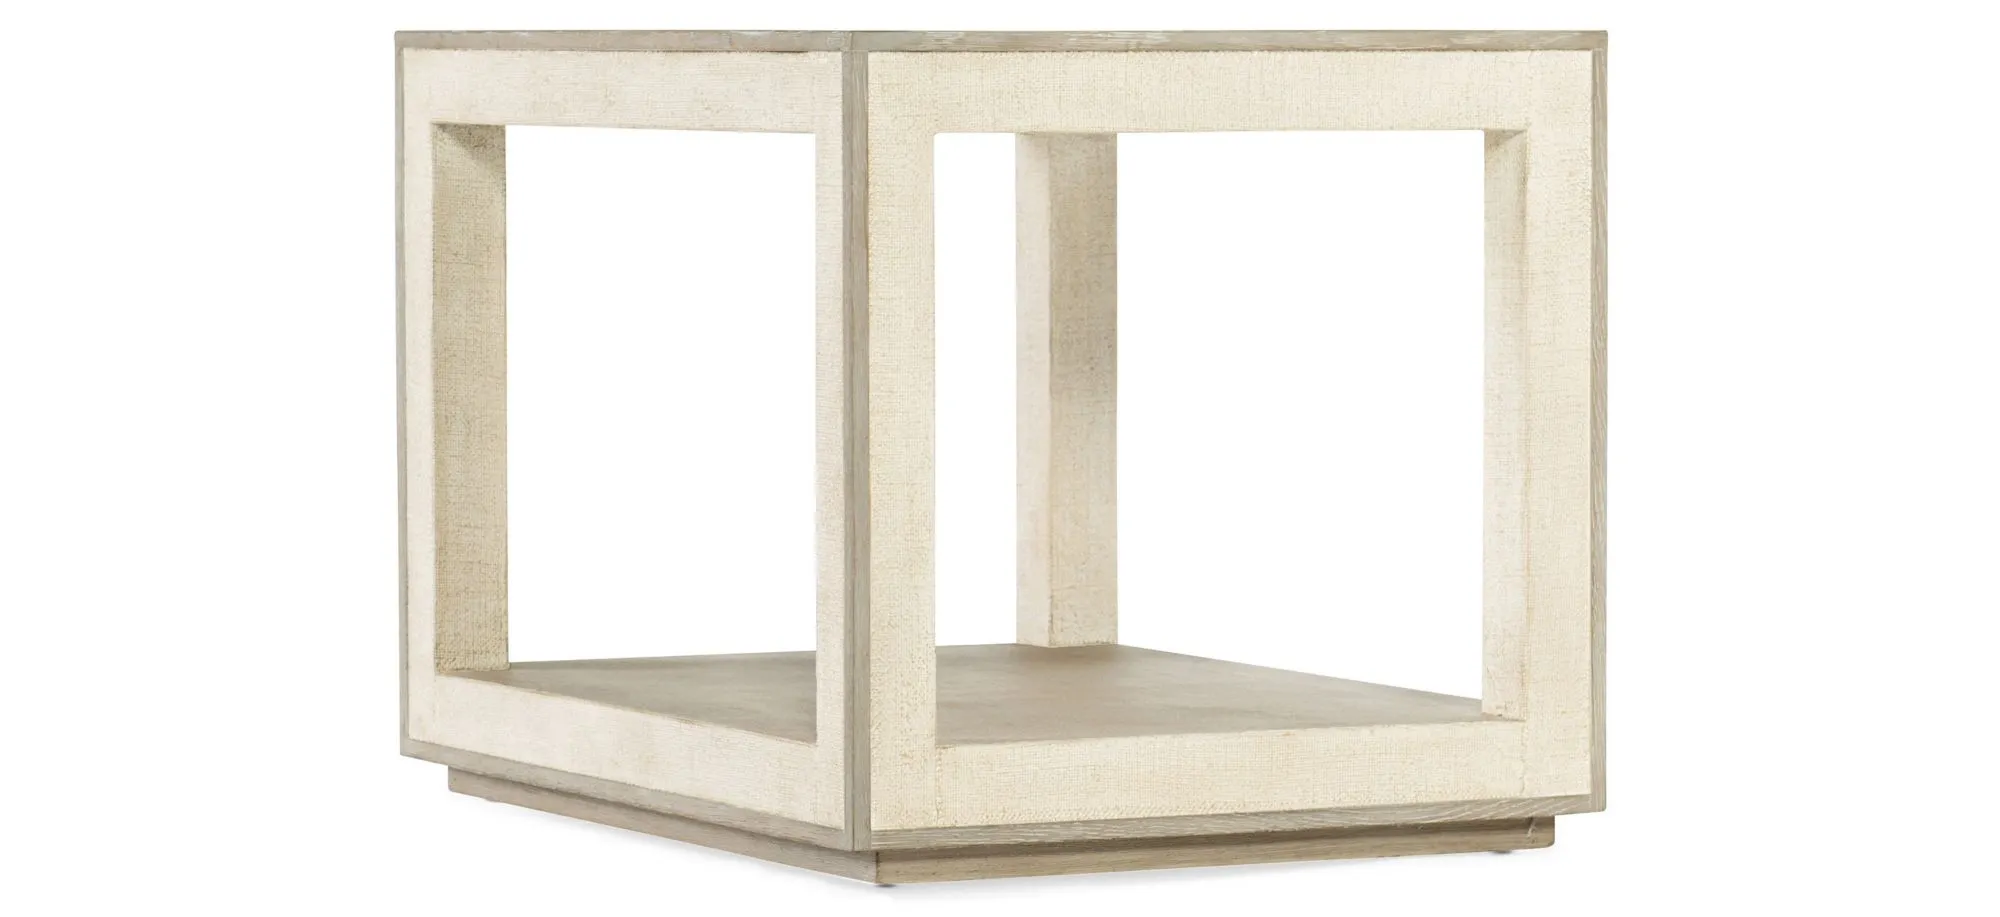 Cora End Table in Beige by Hooker Furniture